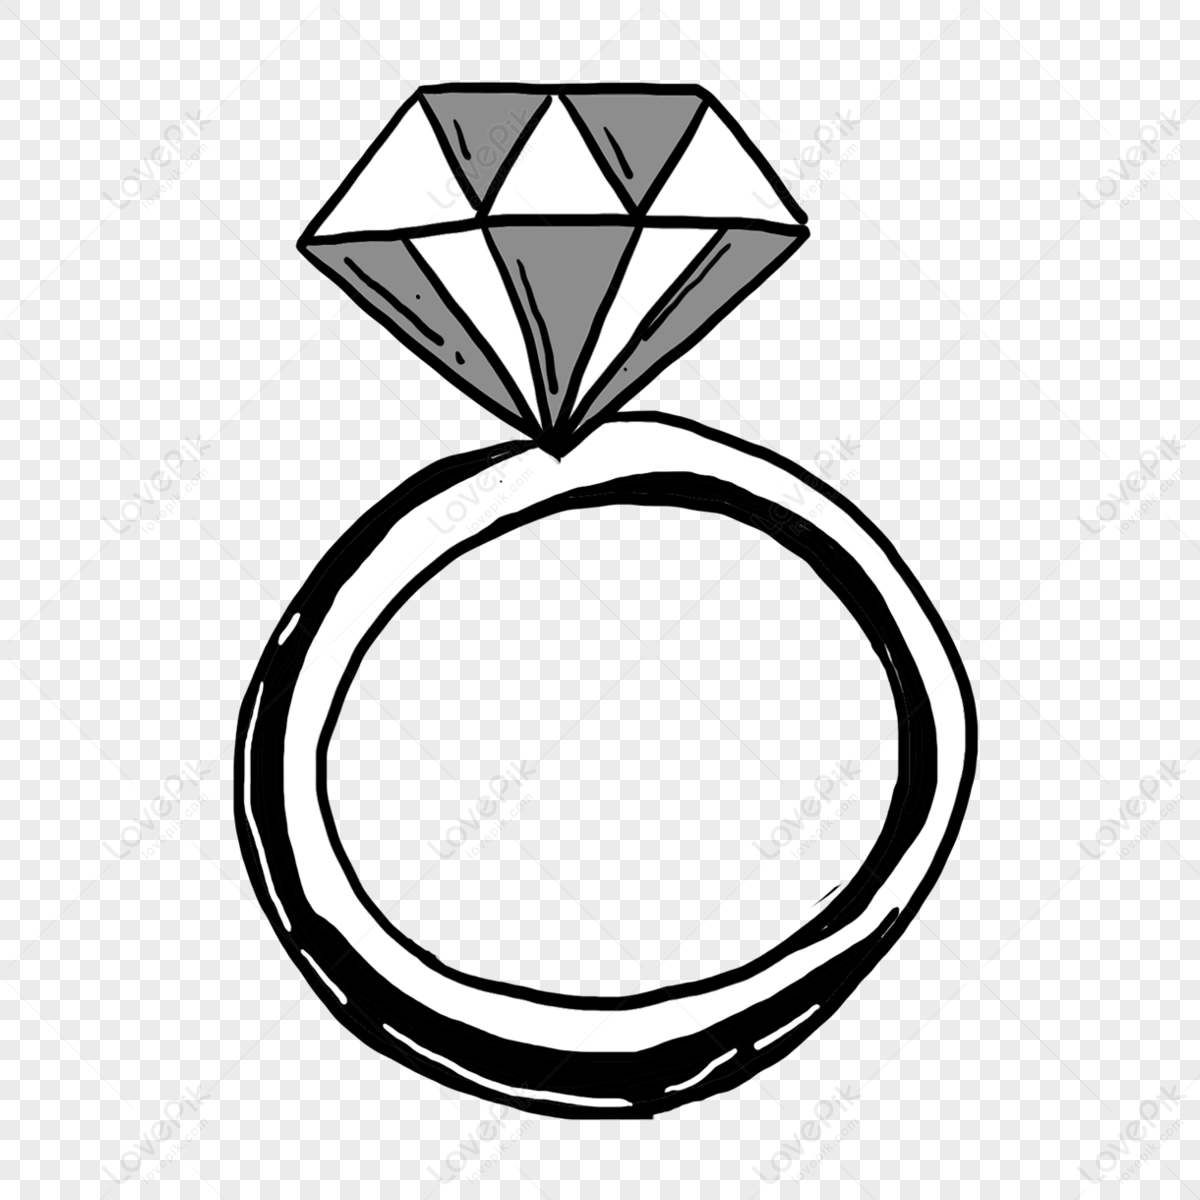 Diamond Wedding Ring Clipart PNG Images, Wedding Ring With Diamond Black  And White, Wedding Logo, Diamond Logo, Wedding PNG Image For Free Download